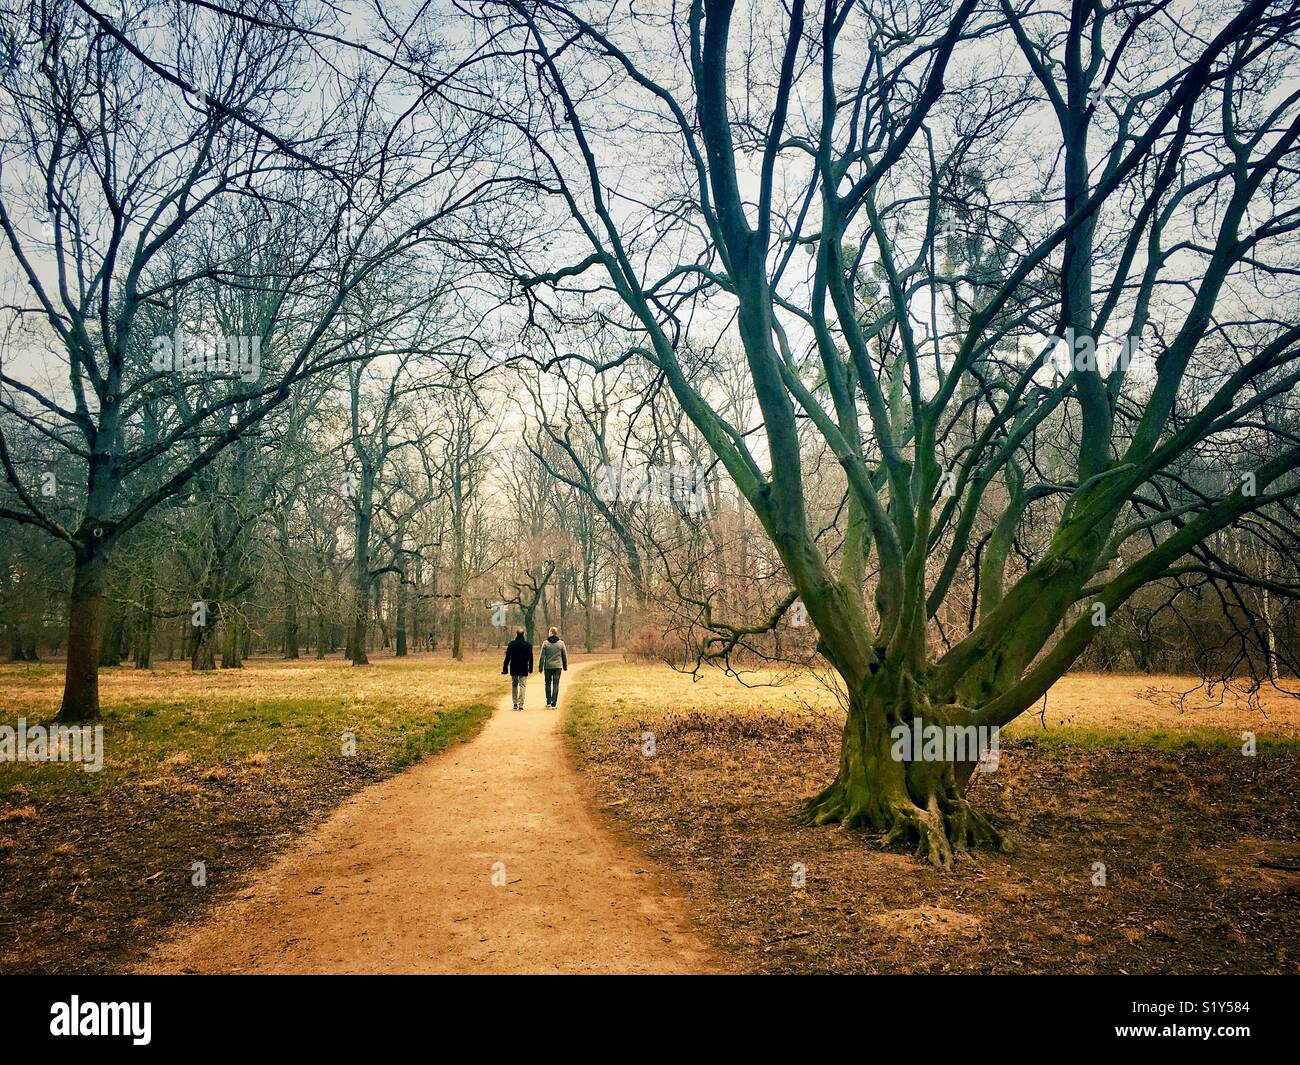 Two people walking along a path through a park in winter, Waldpark, Mannheim, Baden-Württemberg, Germany Stock Photo